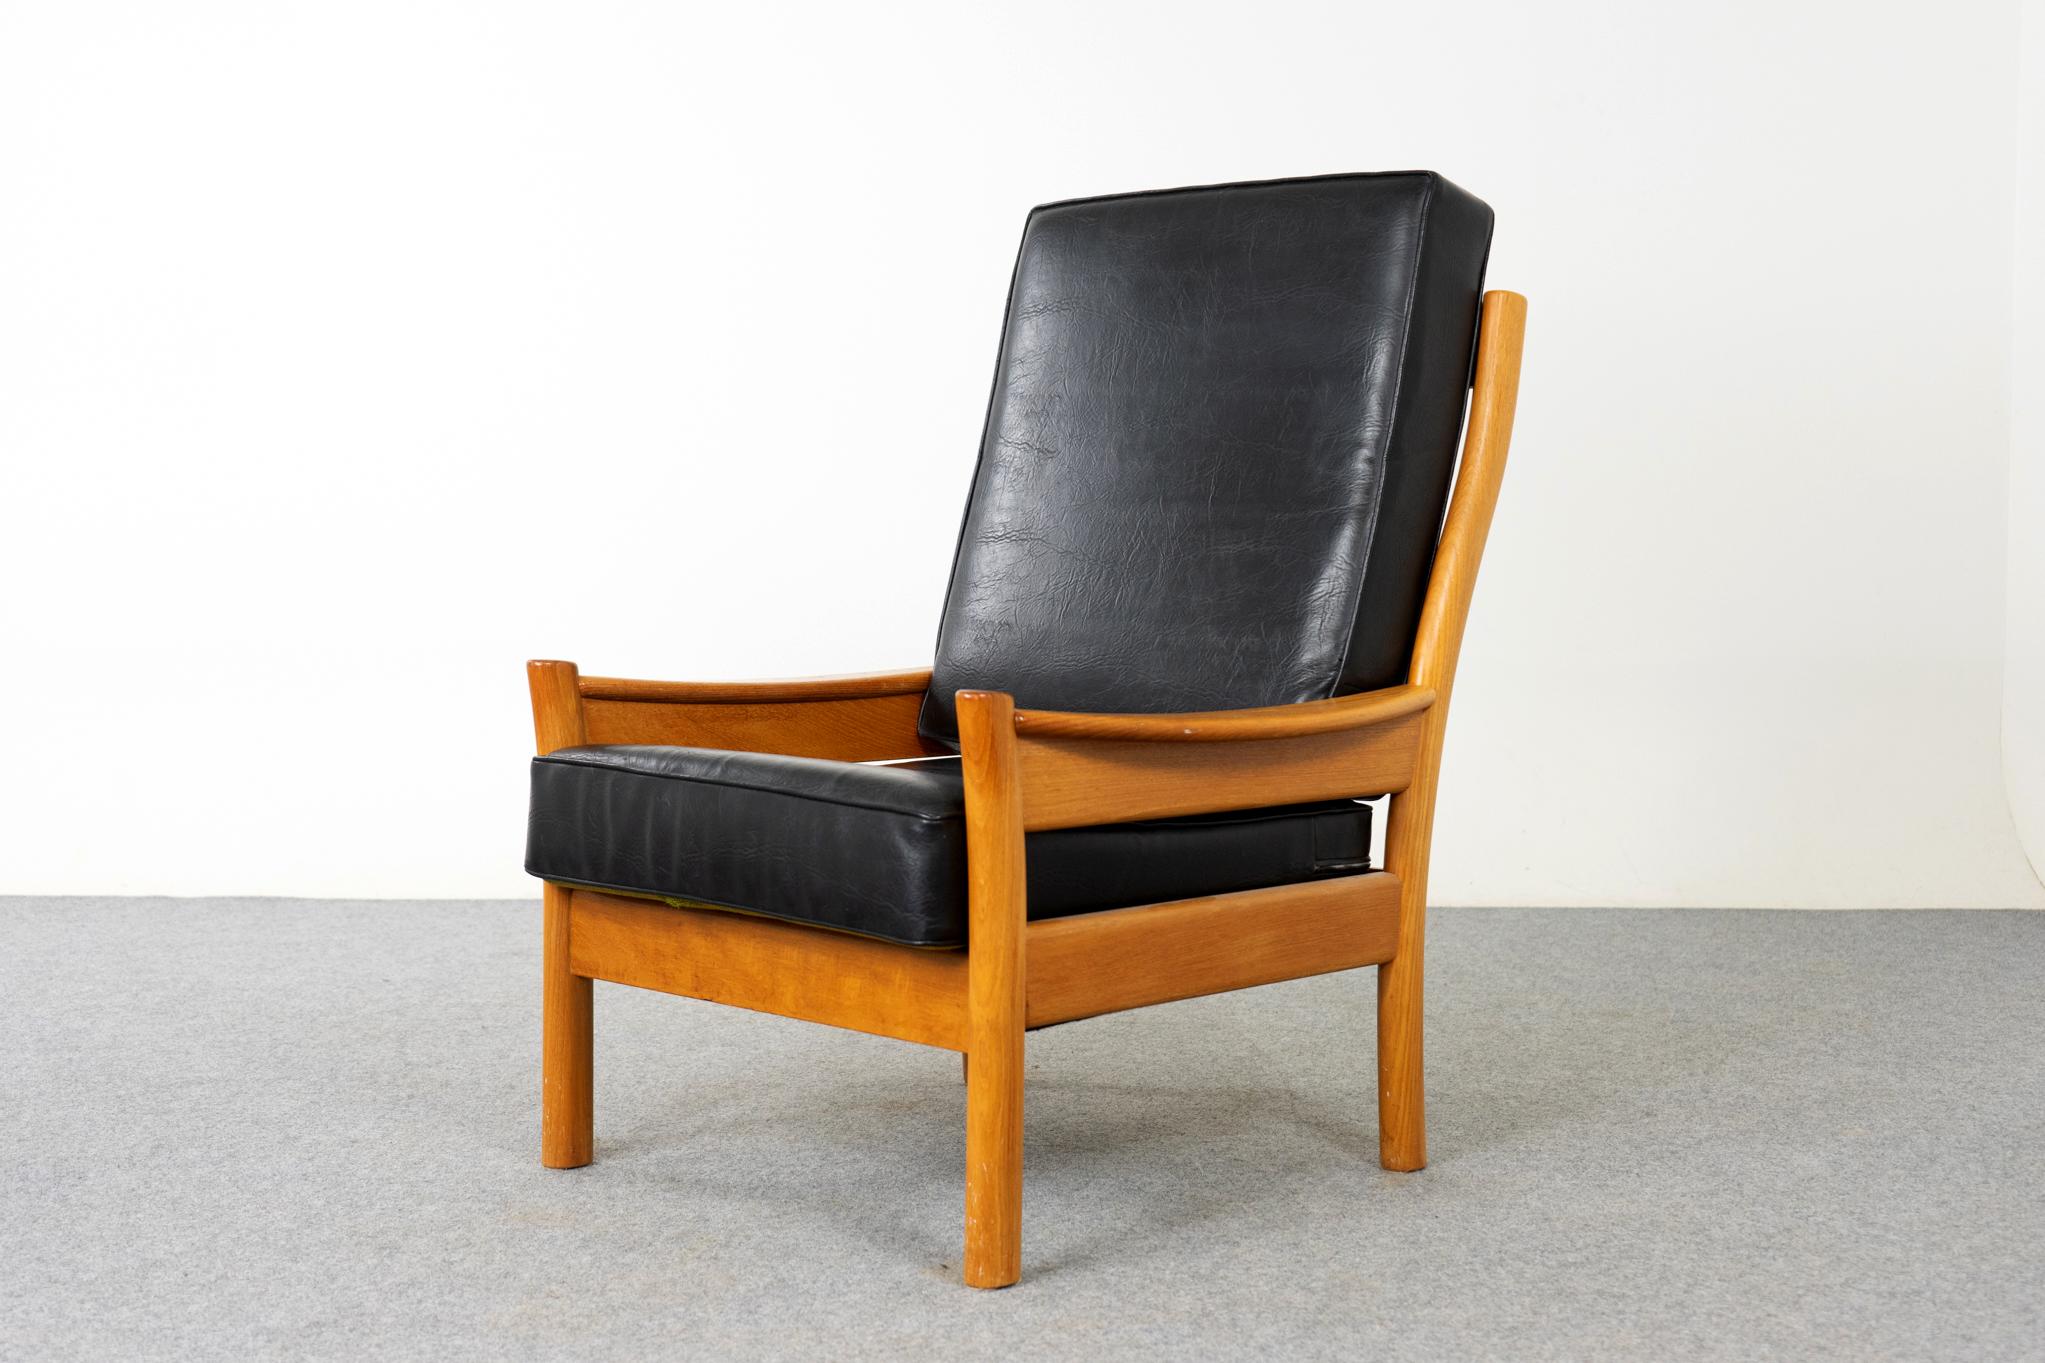 Scandinavian lounge chair made with teak circa 1970's. High back on lounge chair provides extra support for your neck. Clean modern solid wood frame with loose cushions design is easy to combine with other furniture in your living room.

Wood In